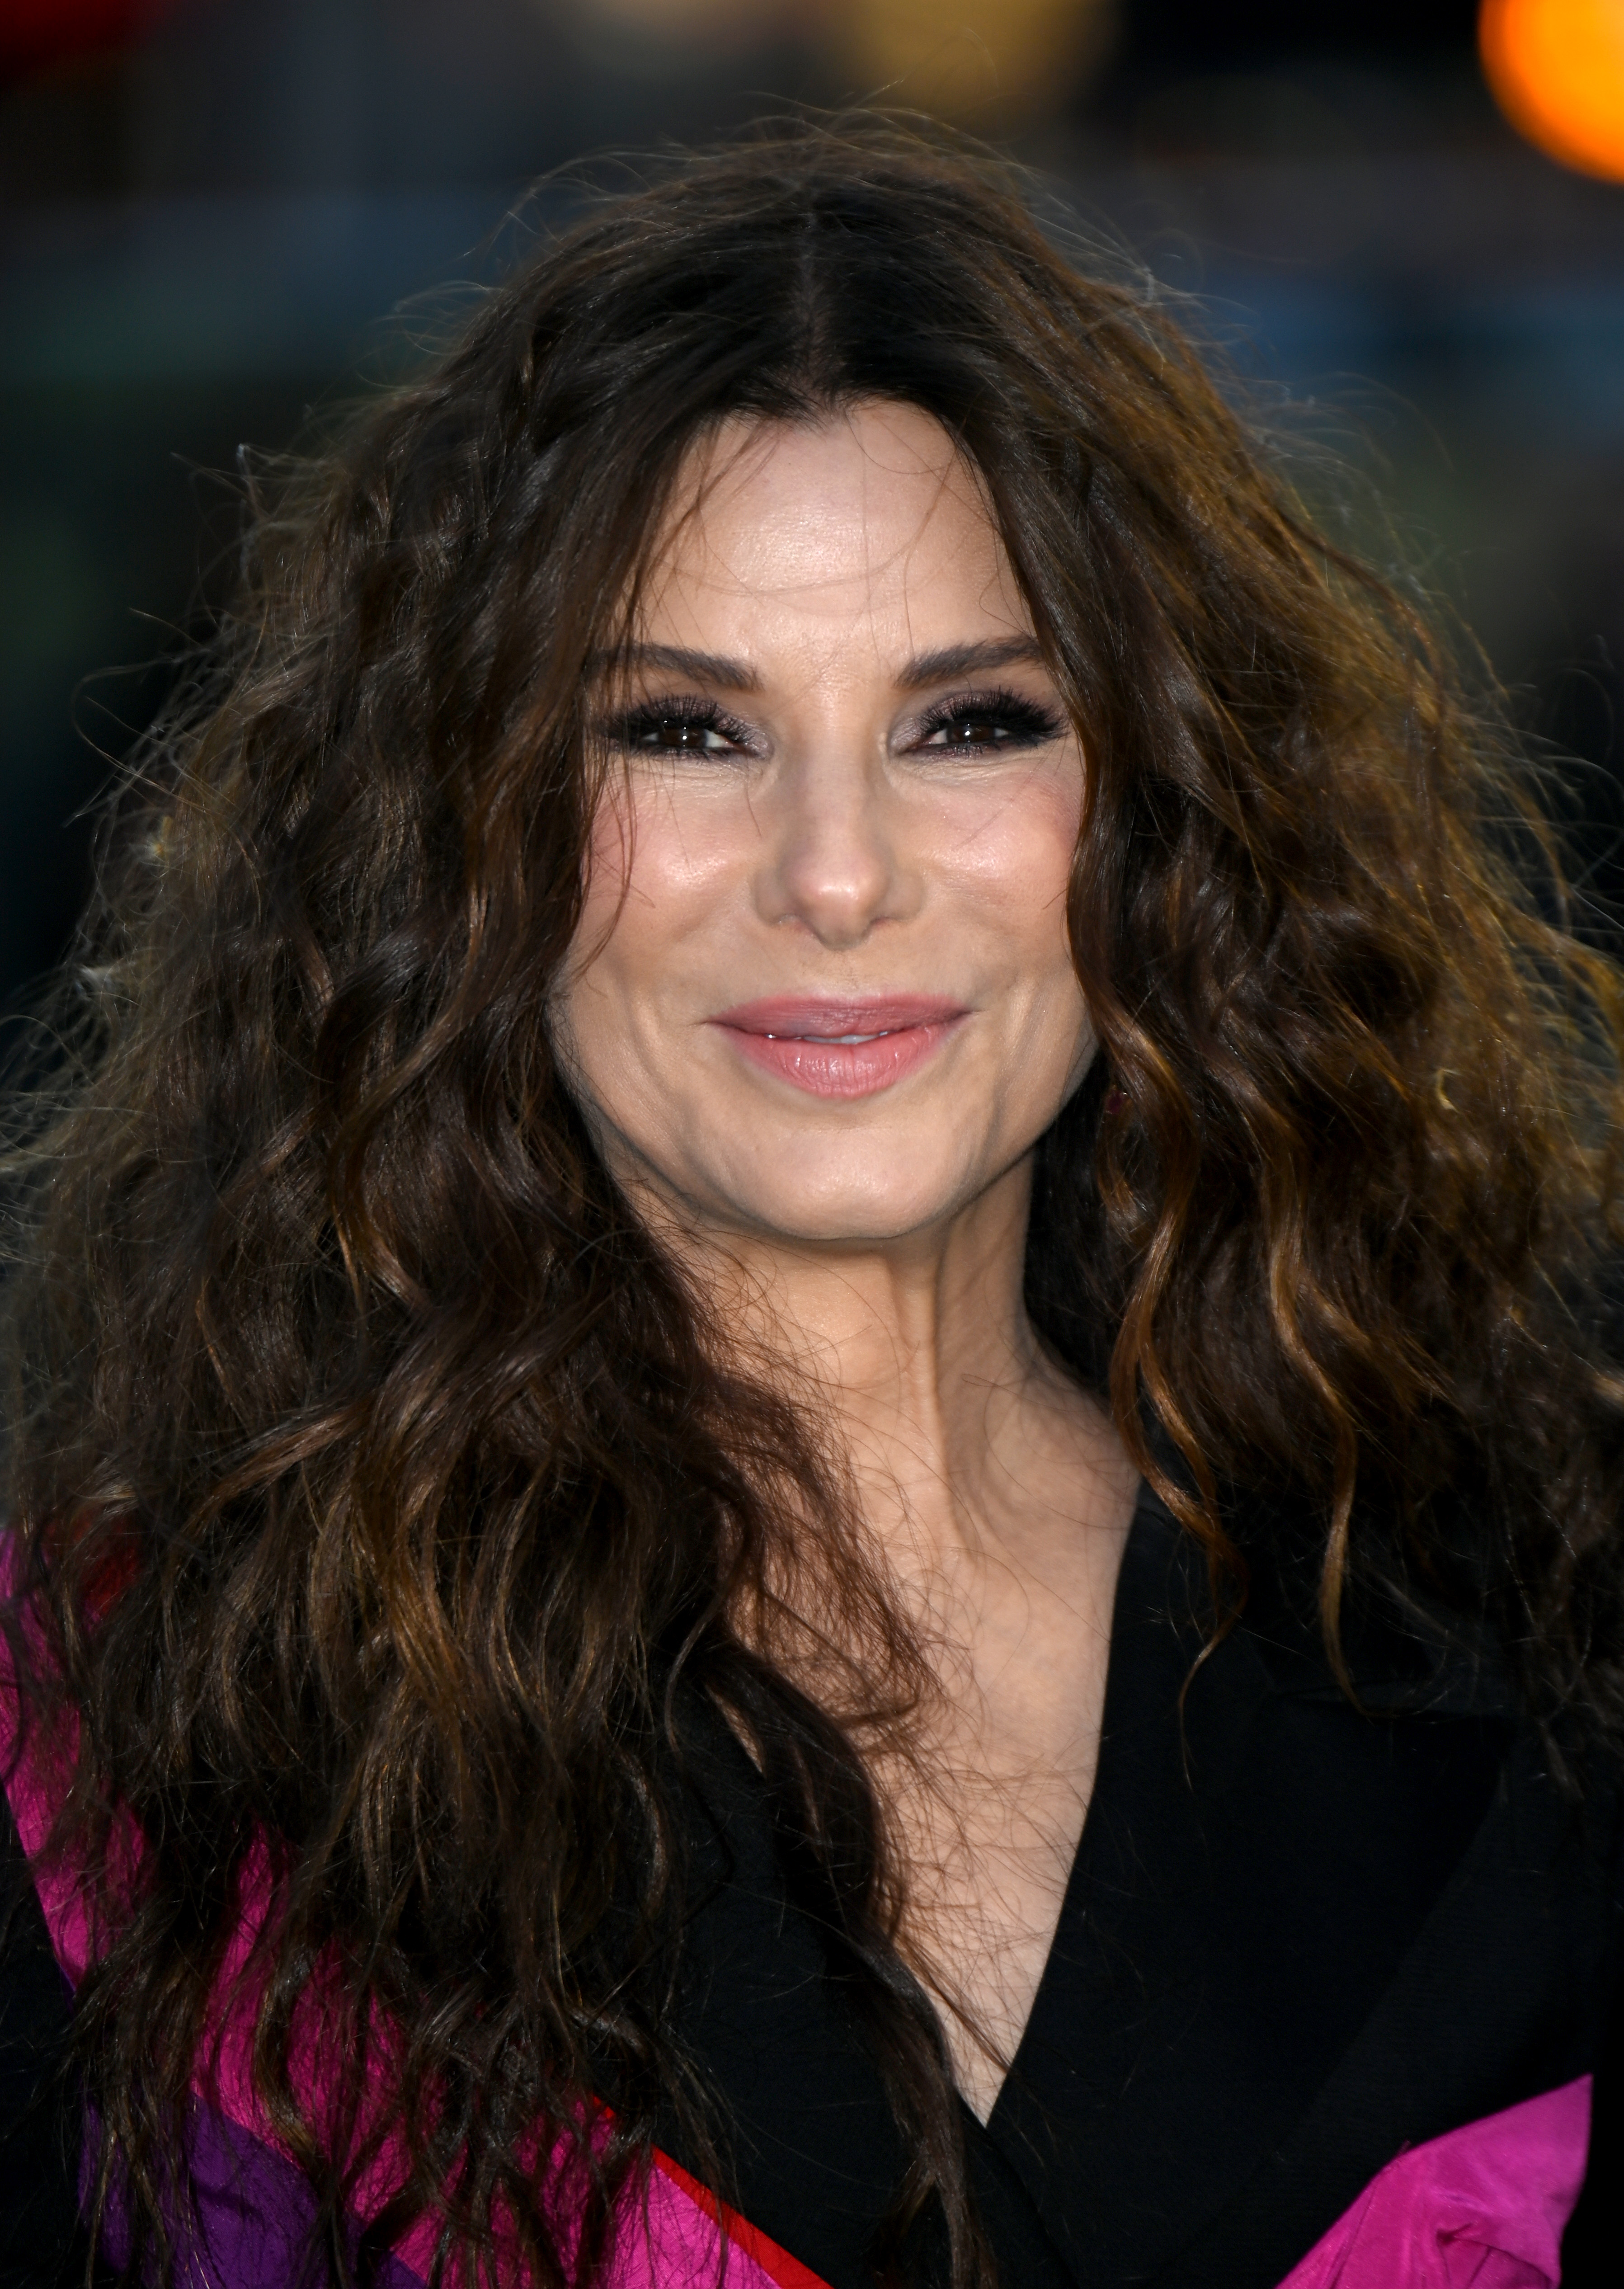 Sandra Bullock attends "The Lost City" UK screening on March 31, 2022 in London, England. | Source: Getty Images